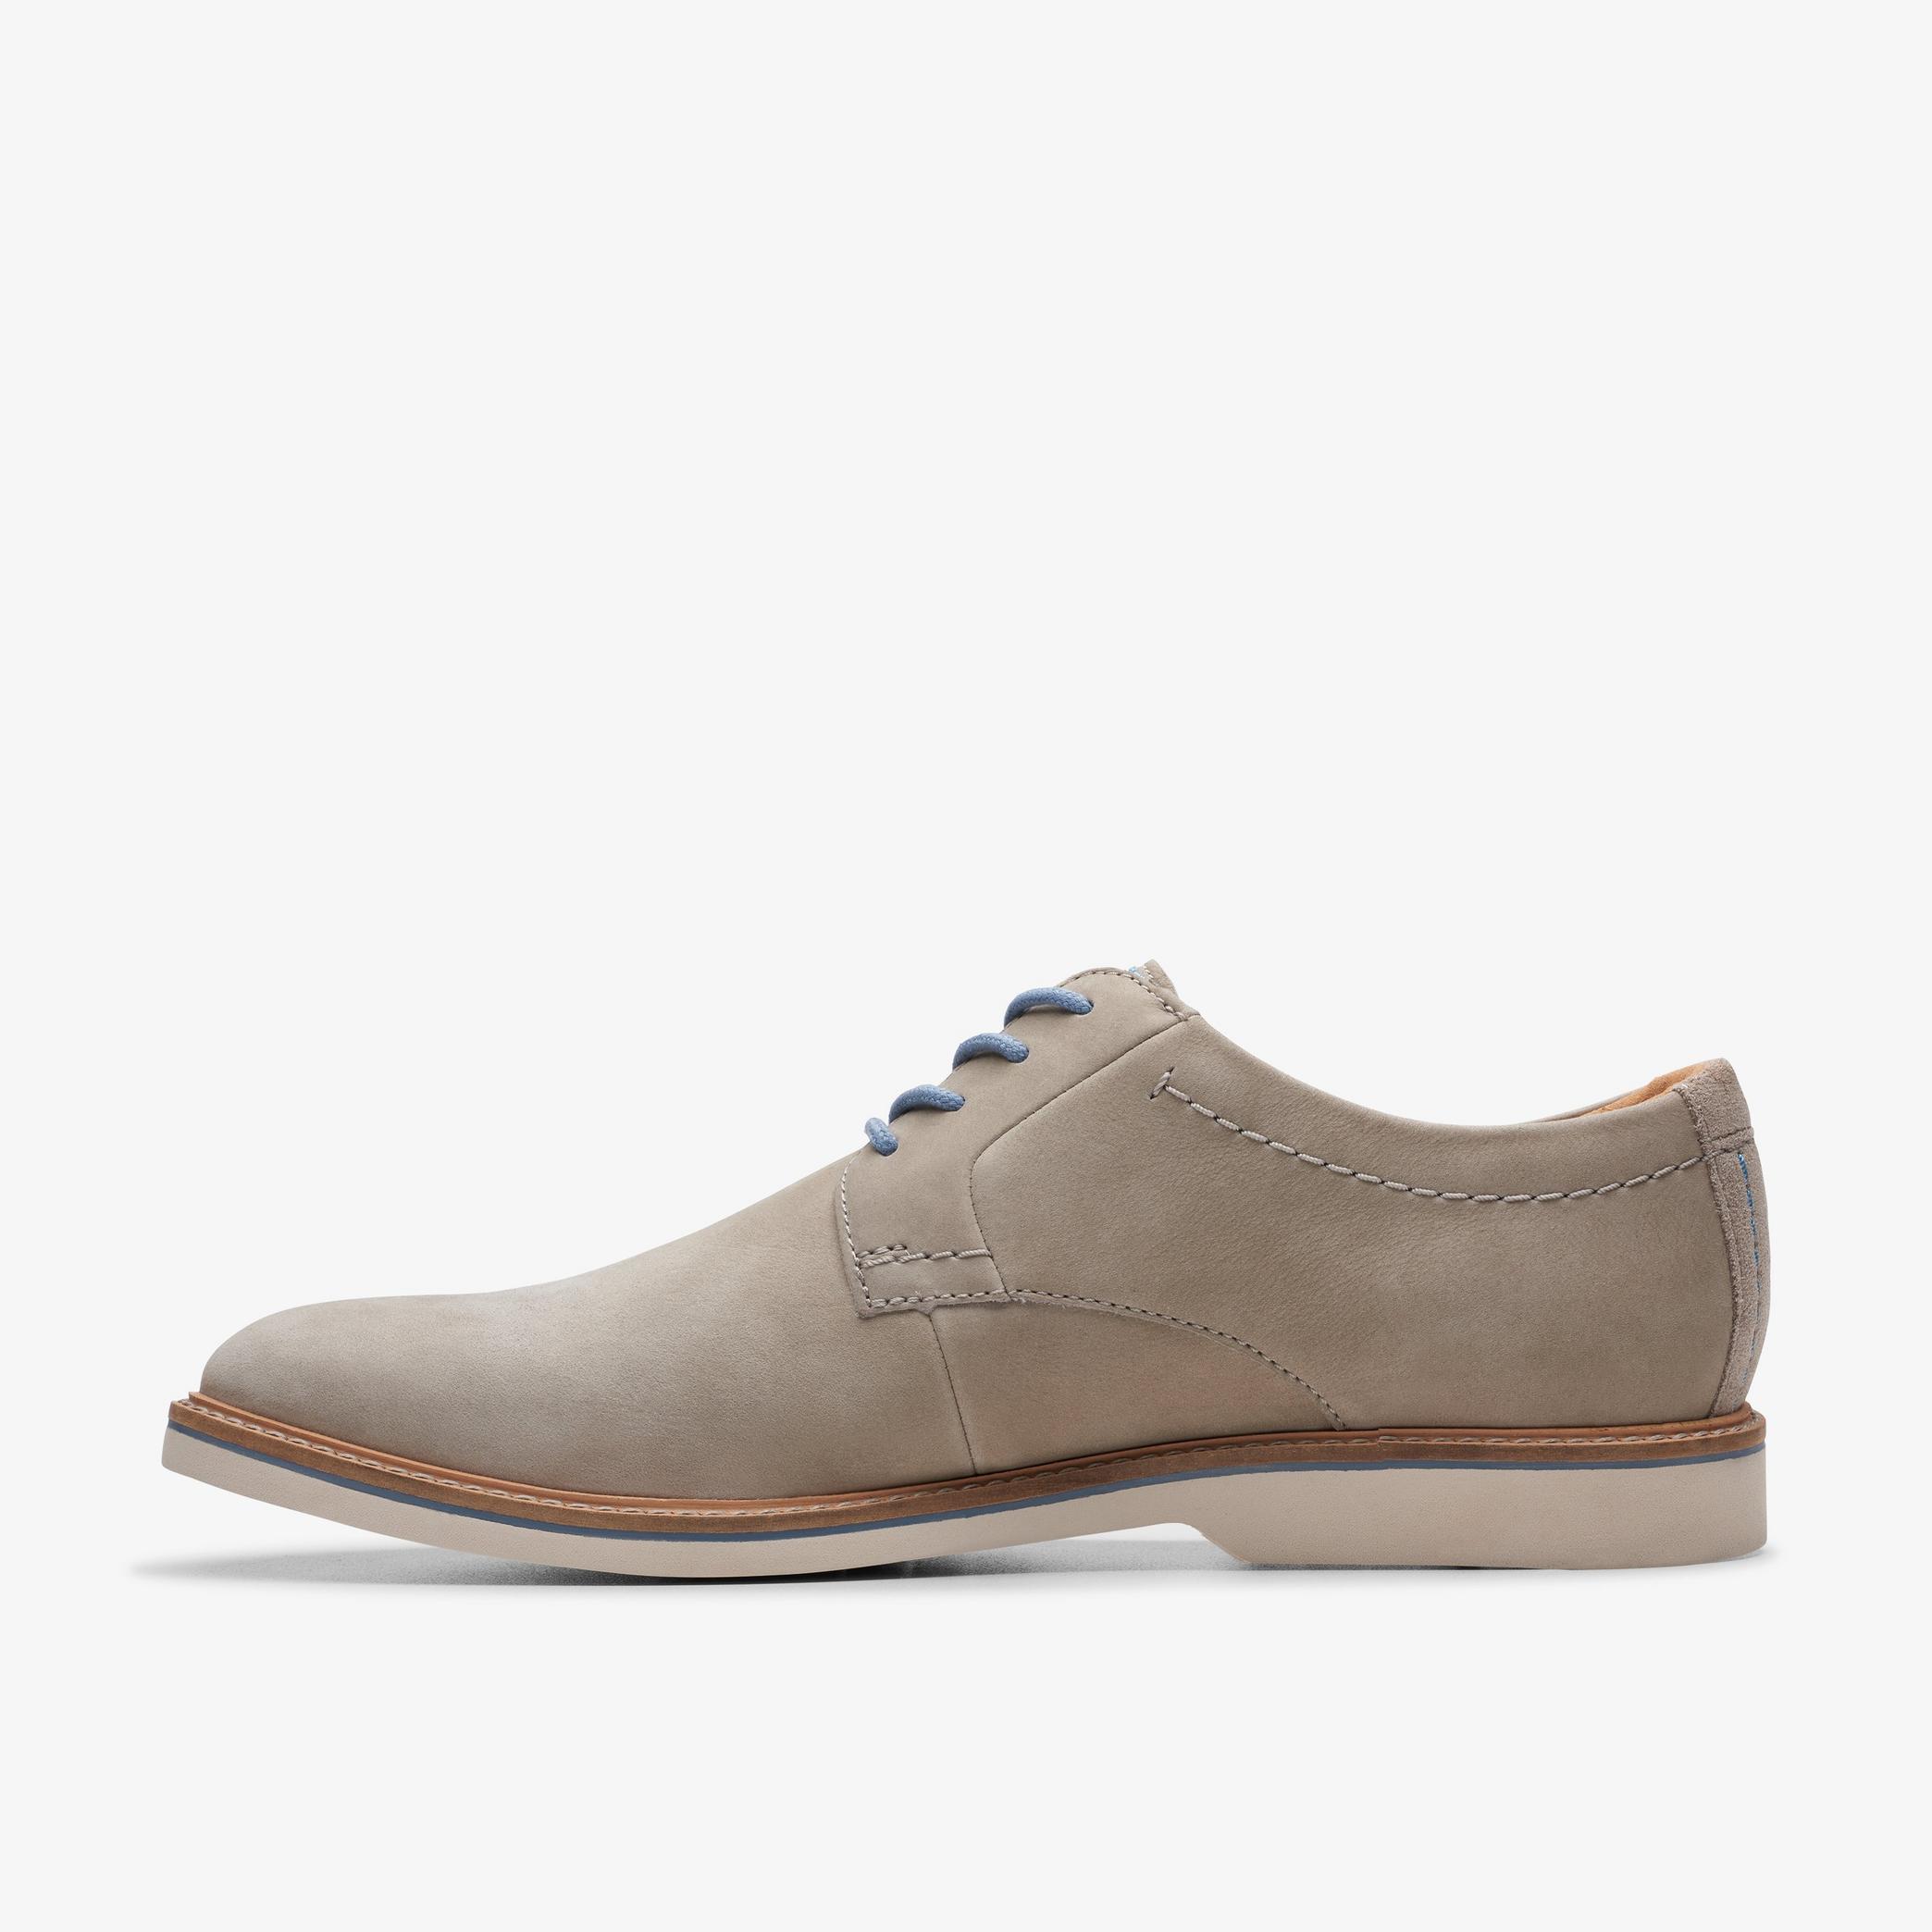 Atticus LT Lace Grey Nubuck Oxford Shoes, view 2 of 11